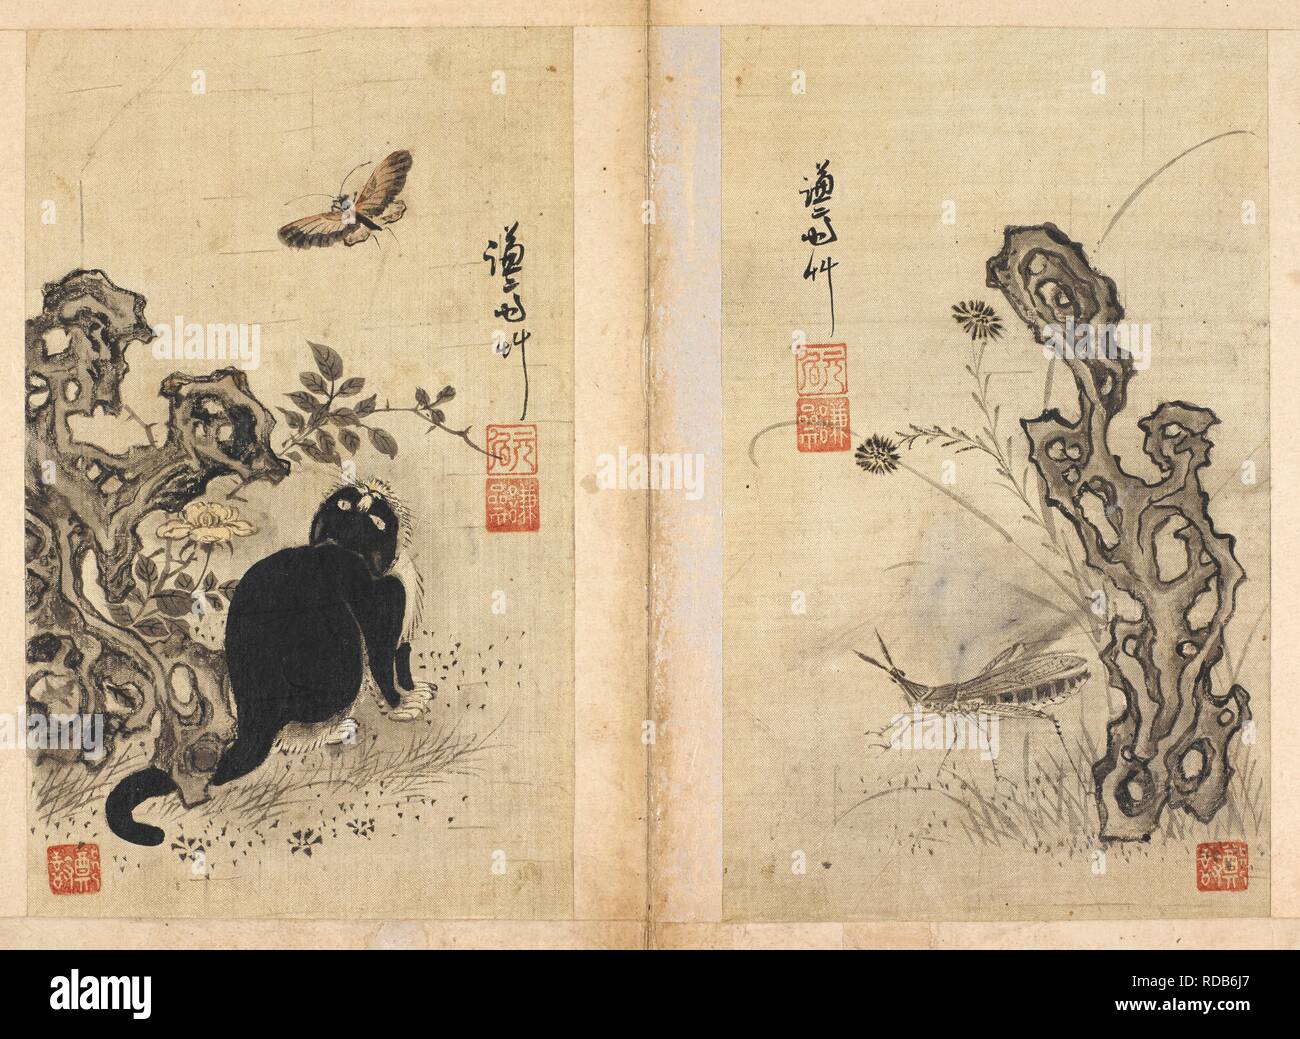 A cat looking up at a butterfly. An insect (grasshopper?) and plant. Kyomjae hwachâ€™op. [Album of paintings by Kyomjae [i.e.Chong Son]]. 18th century ?. Album of 16 paintings attributed to the Korean artist Chong Son (1676â€“1759). Source: Or.14391 p.5v - 6. Stock Photo